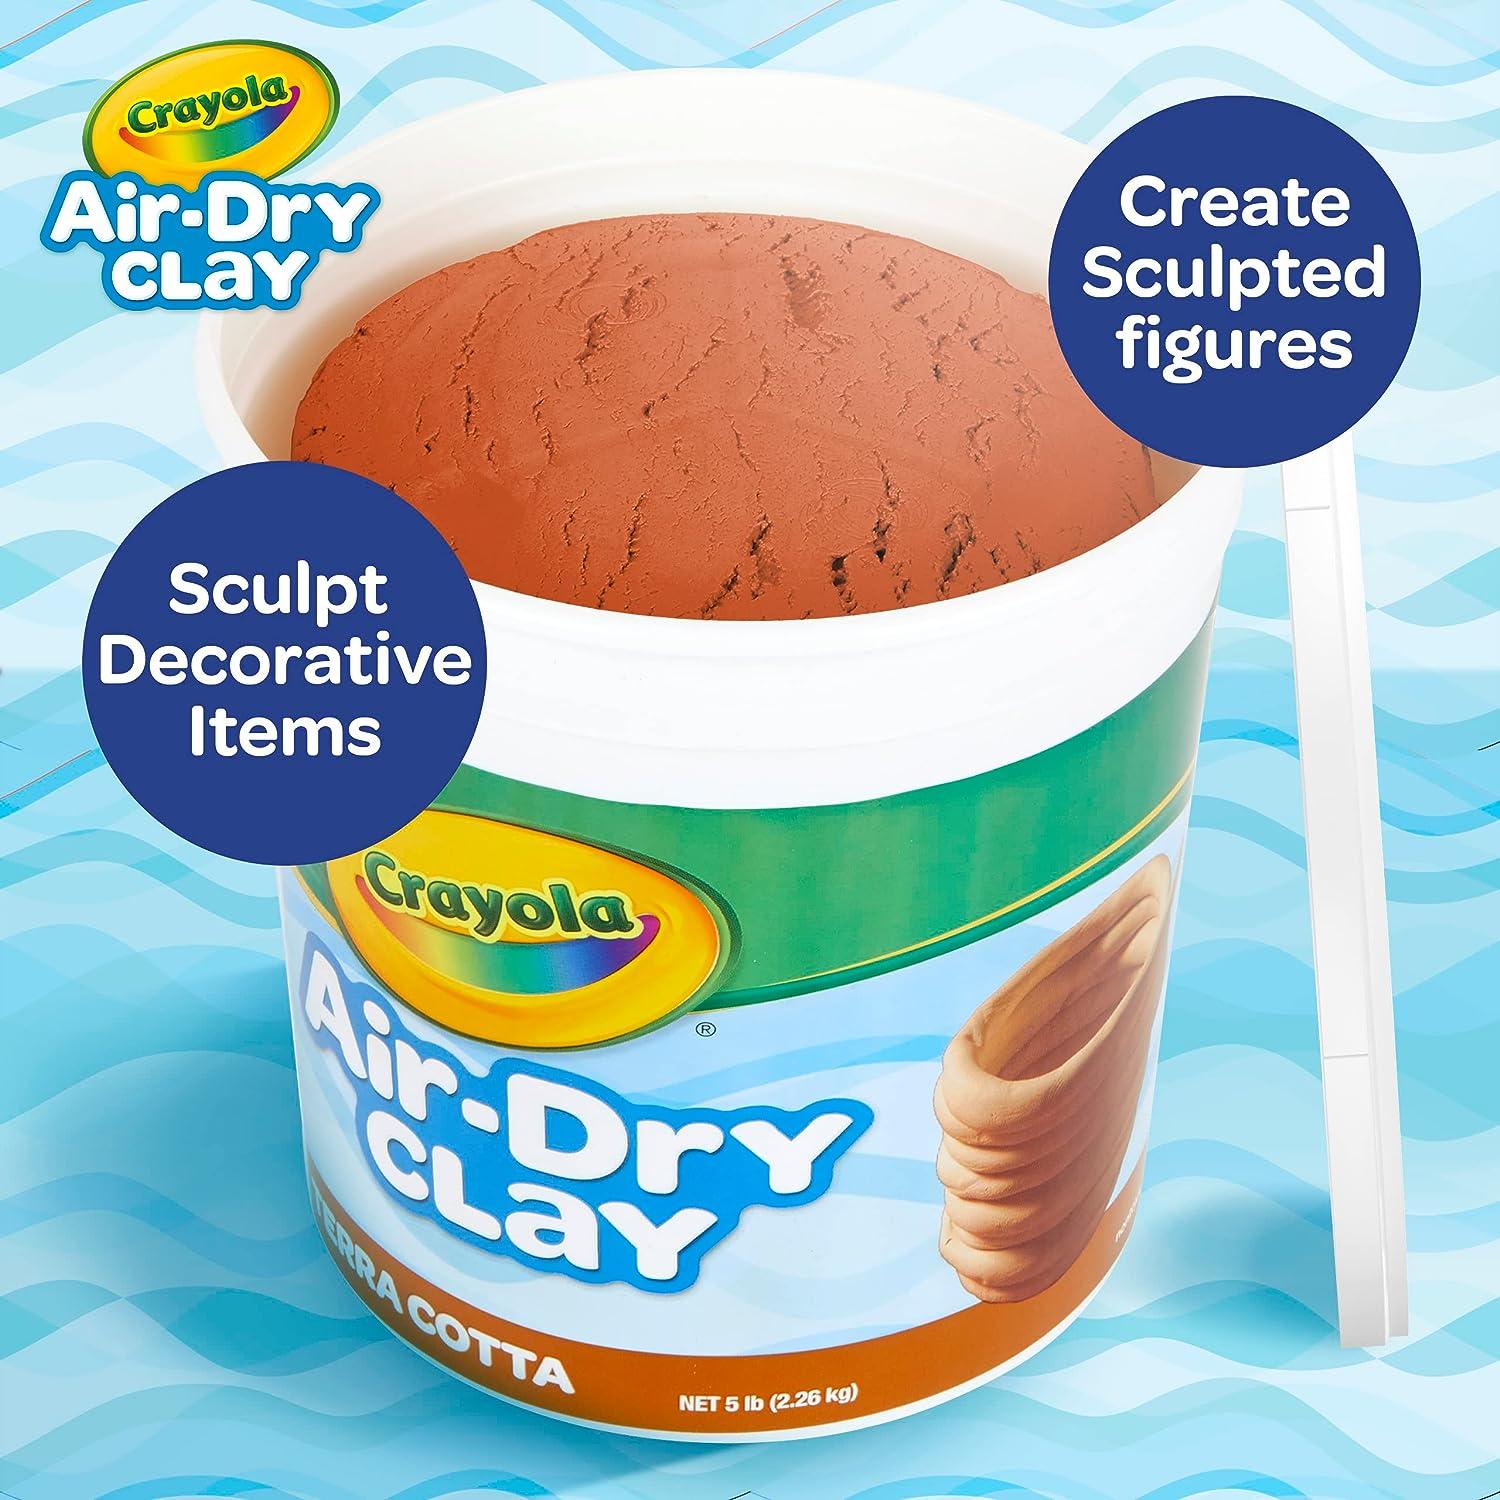 Crayola Air Dry Clay 5lb - Non-Toxic and Ready to Use